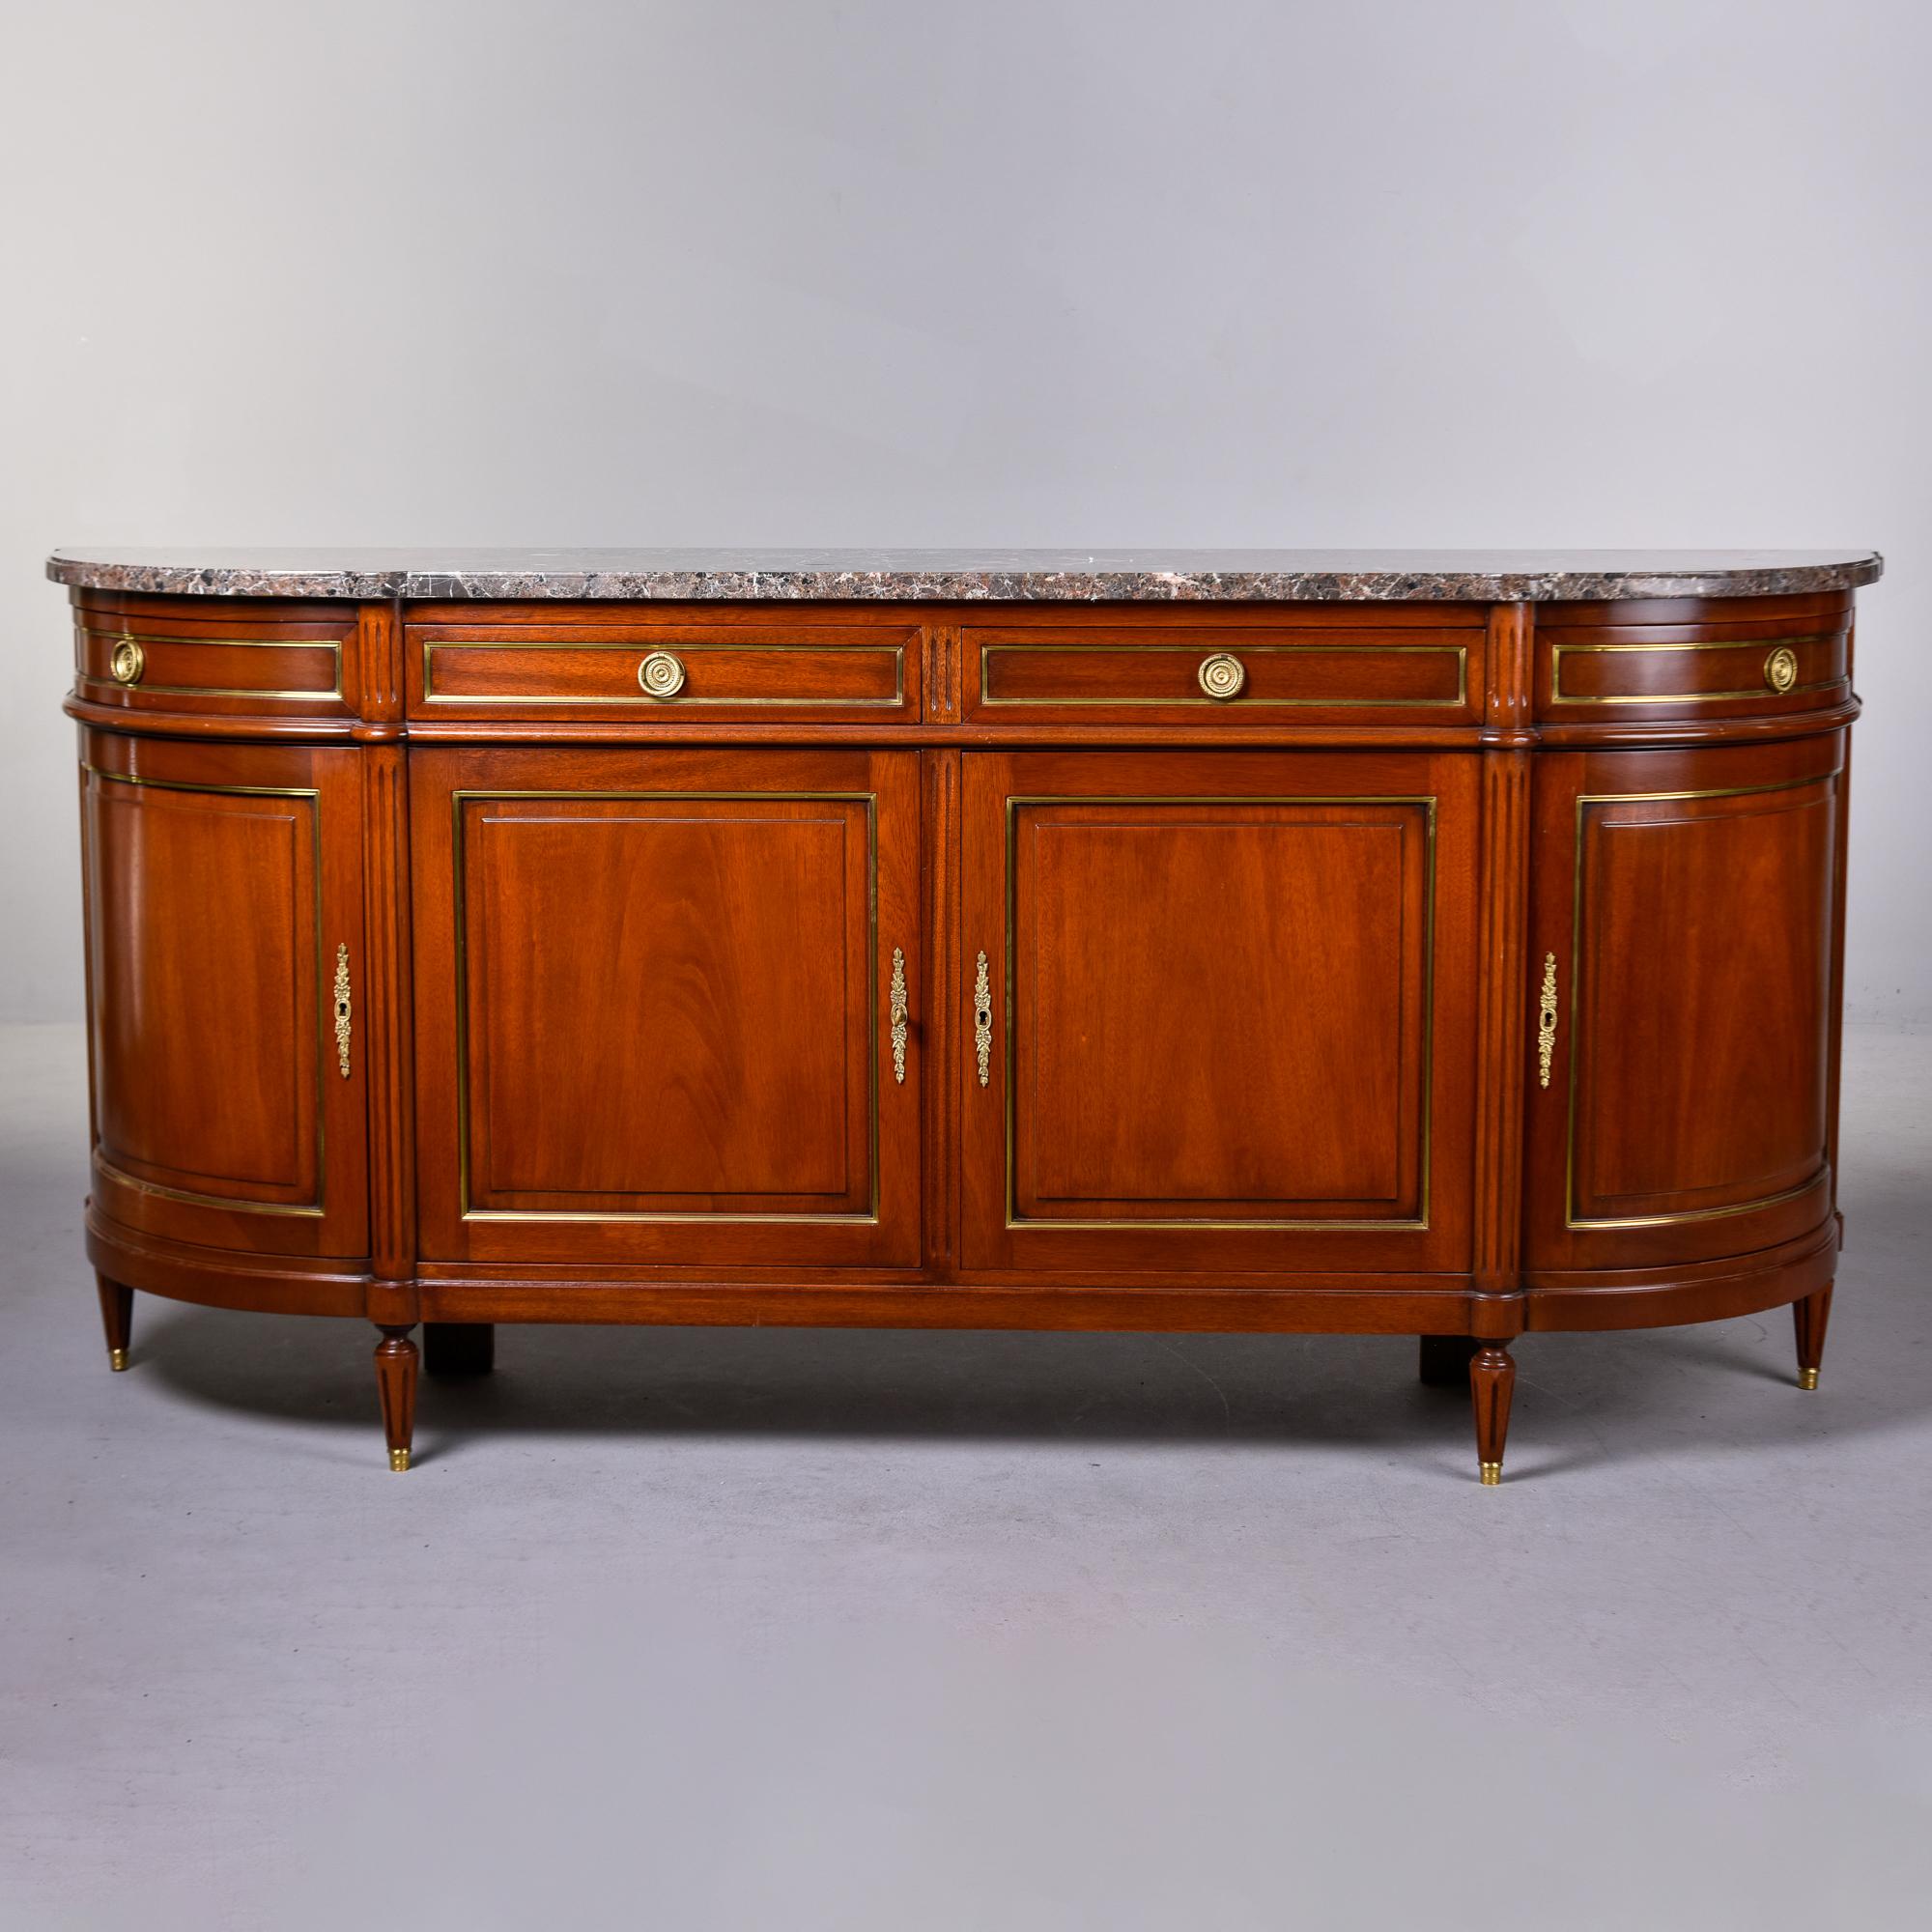 Found in France, this Louis Philippe mahogany and marble sideboard dates from the 1860s. Bow front cabinet with four drawers over four hinged cabinet doors. Marble top has a beveled edge and is a taupey shade of brown with streaks of cream, gray,